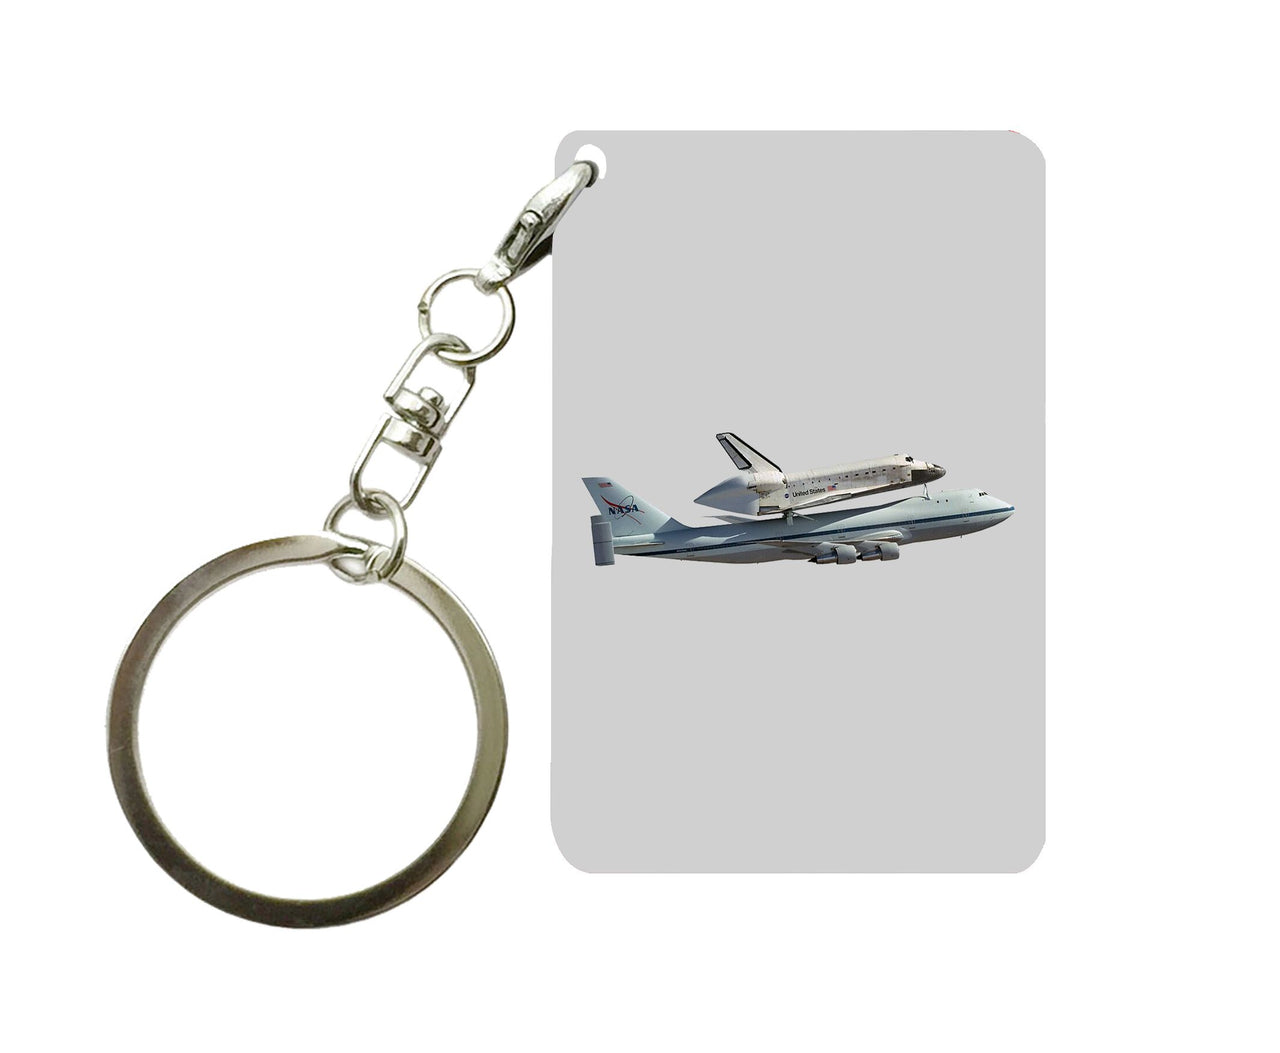 Space shuttle on 747 Designed Key Chains